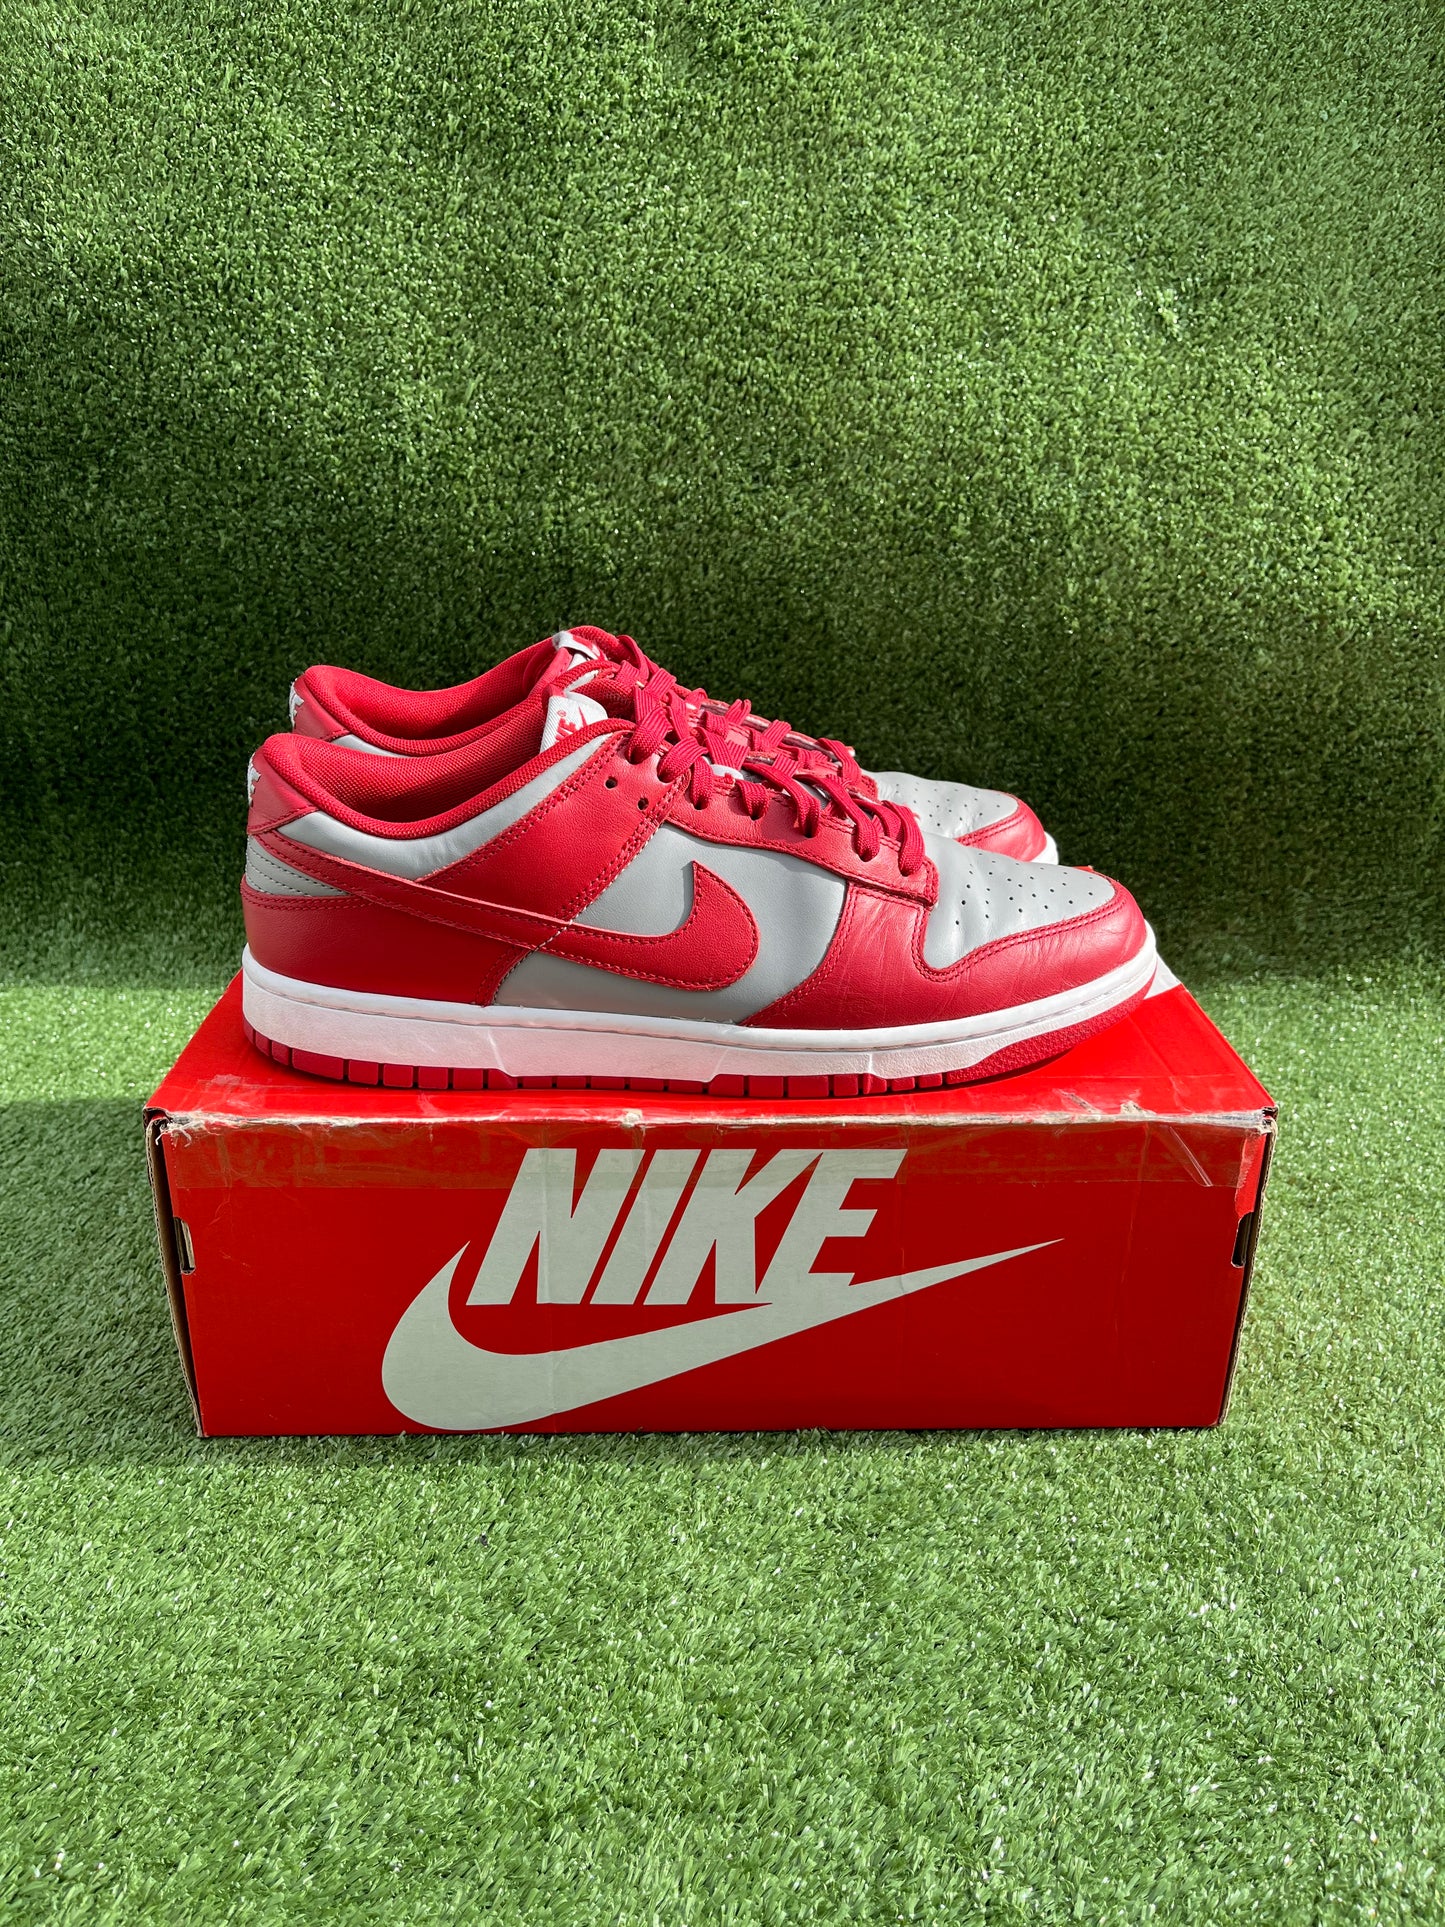 Nike Dunk Low - UNLV [US11-USED]